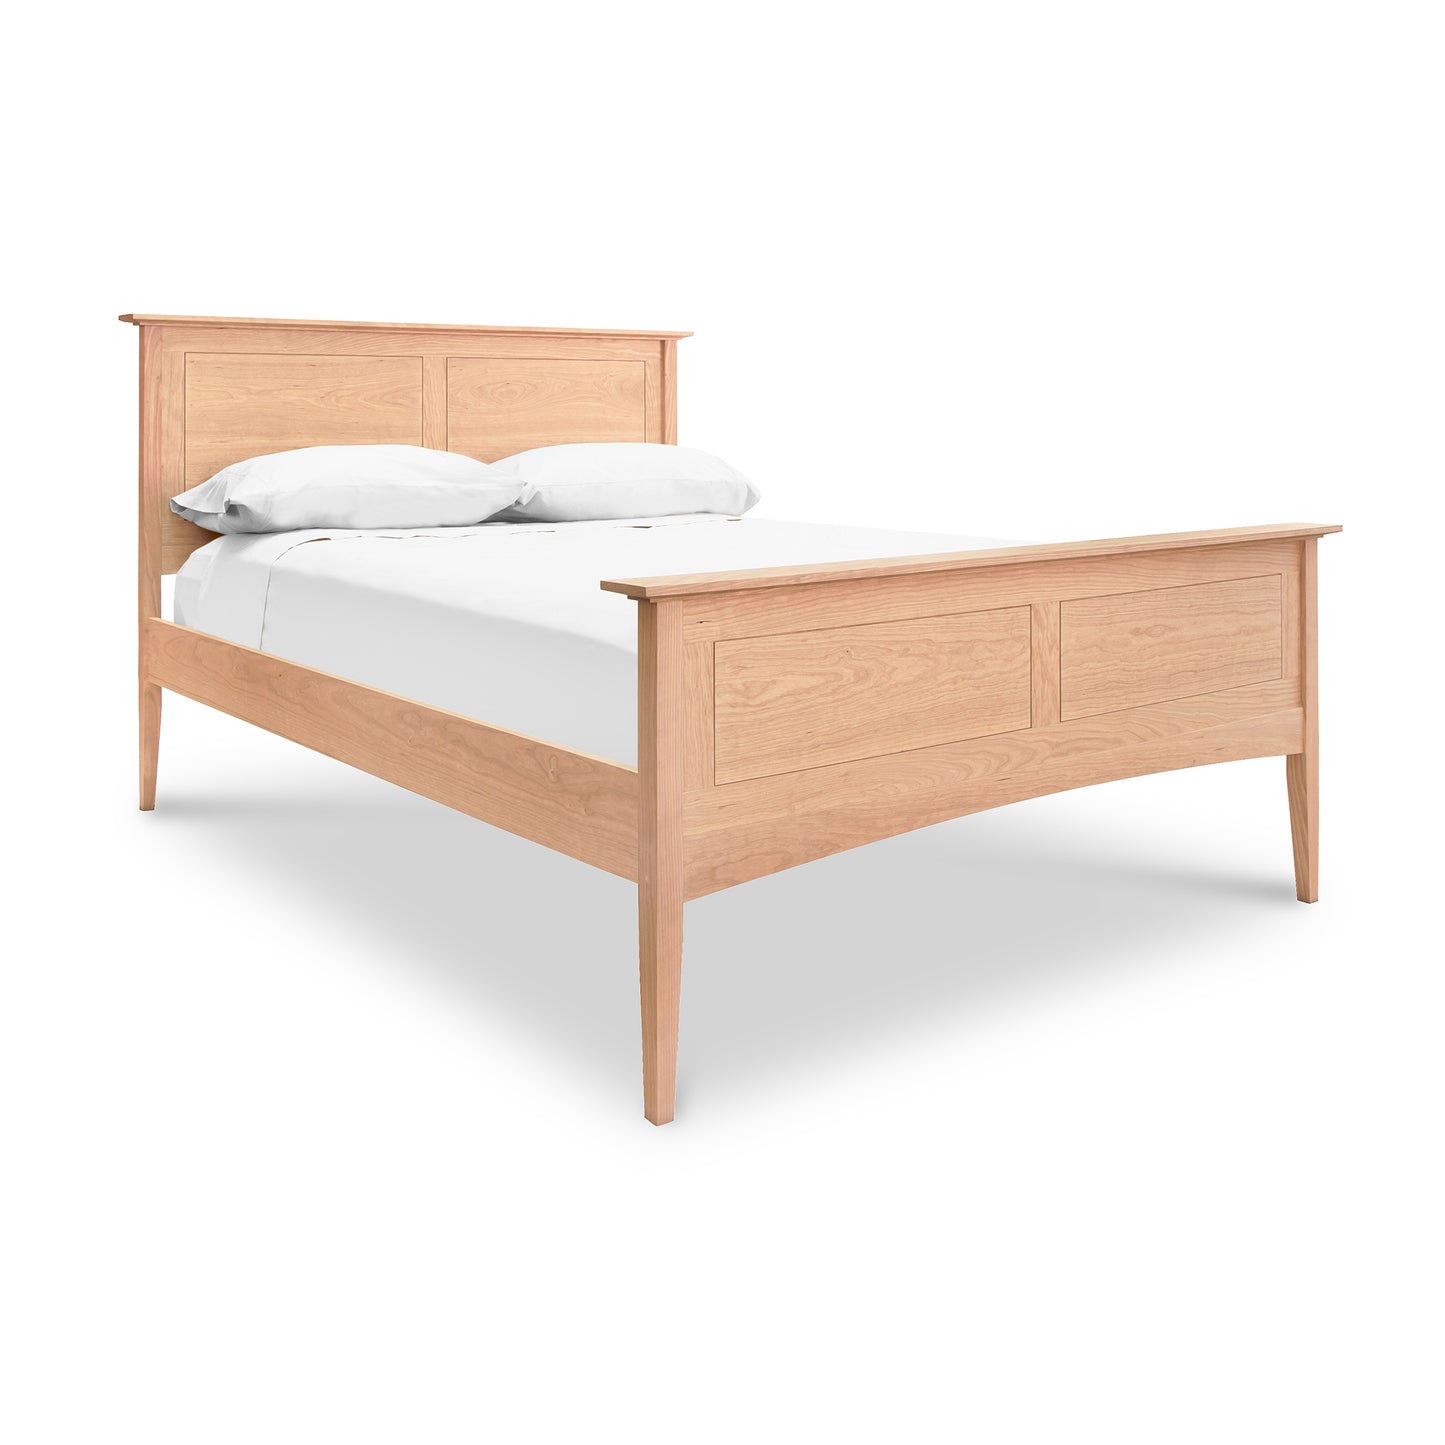 A handmade American Shaker Panel Bed from Maple Corner Woodworks, crafted from sustainably harvested woods, complete with white bedding and pillows, isolated on a white background.